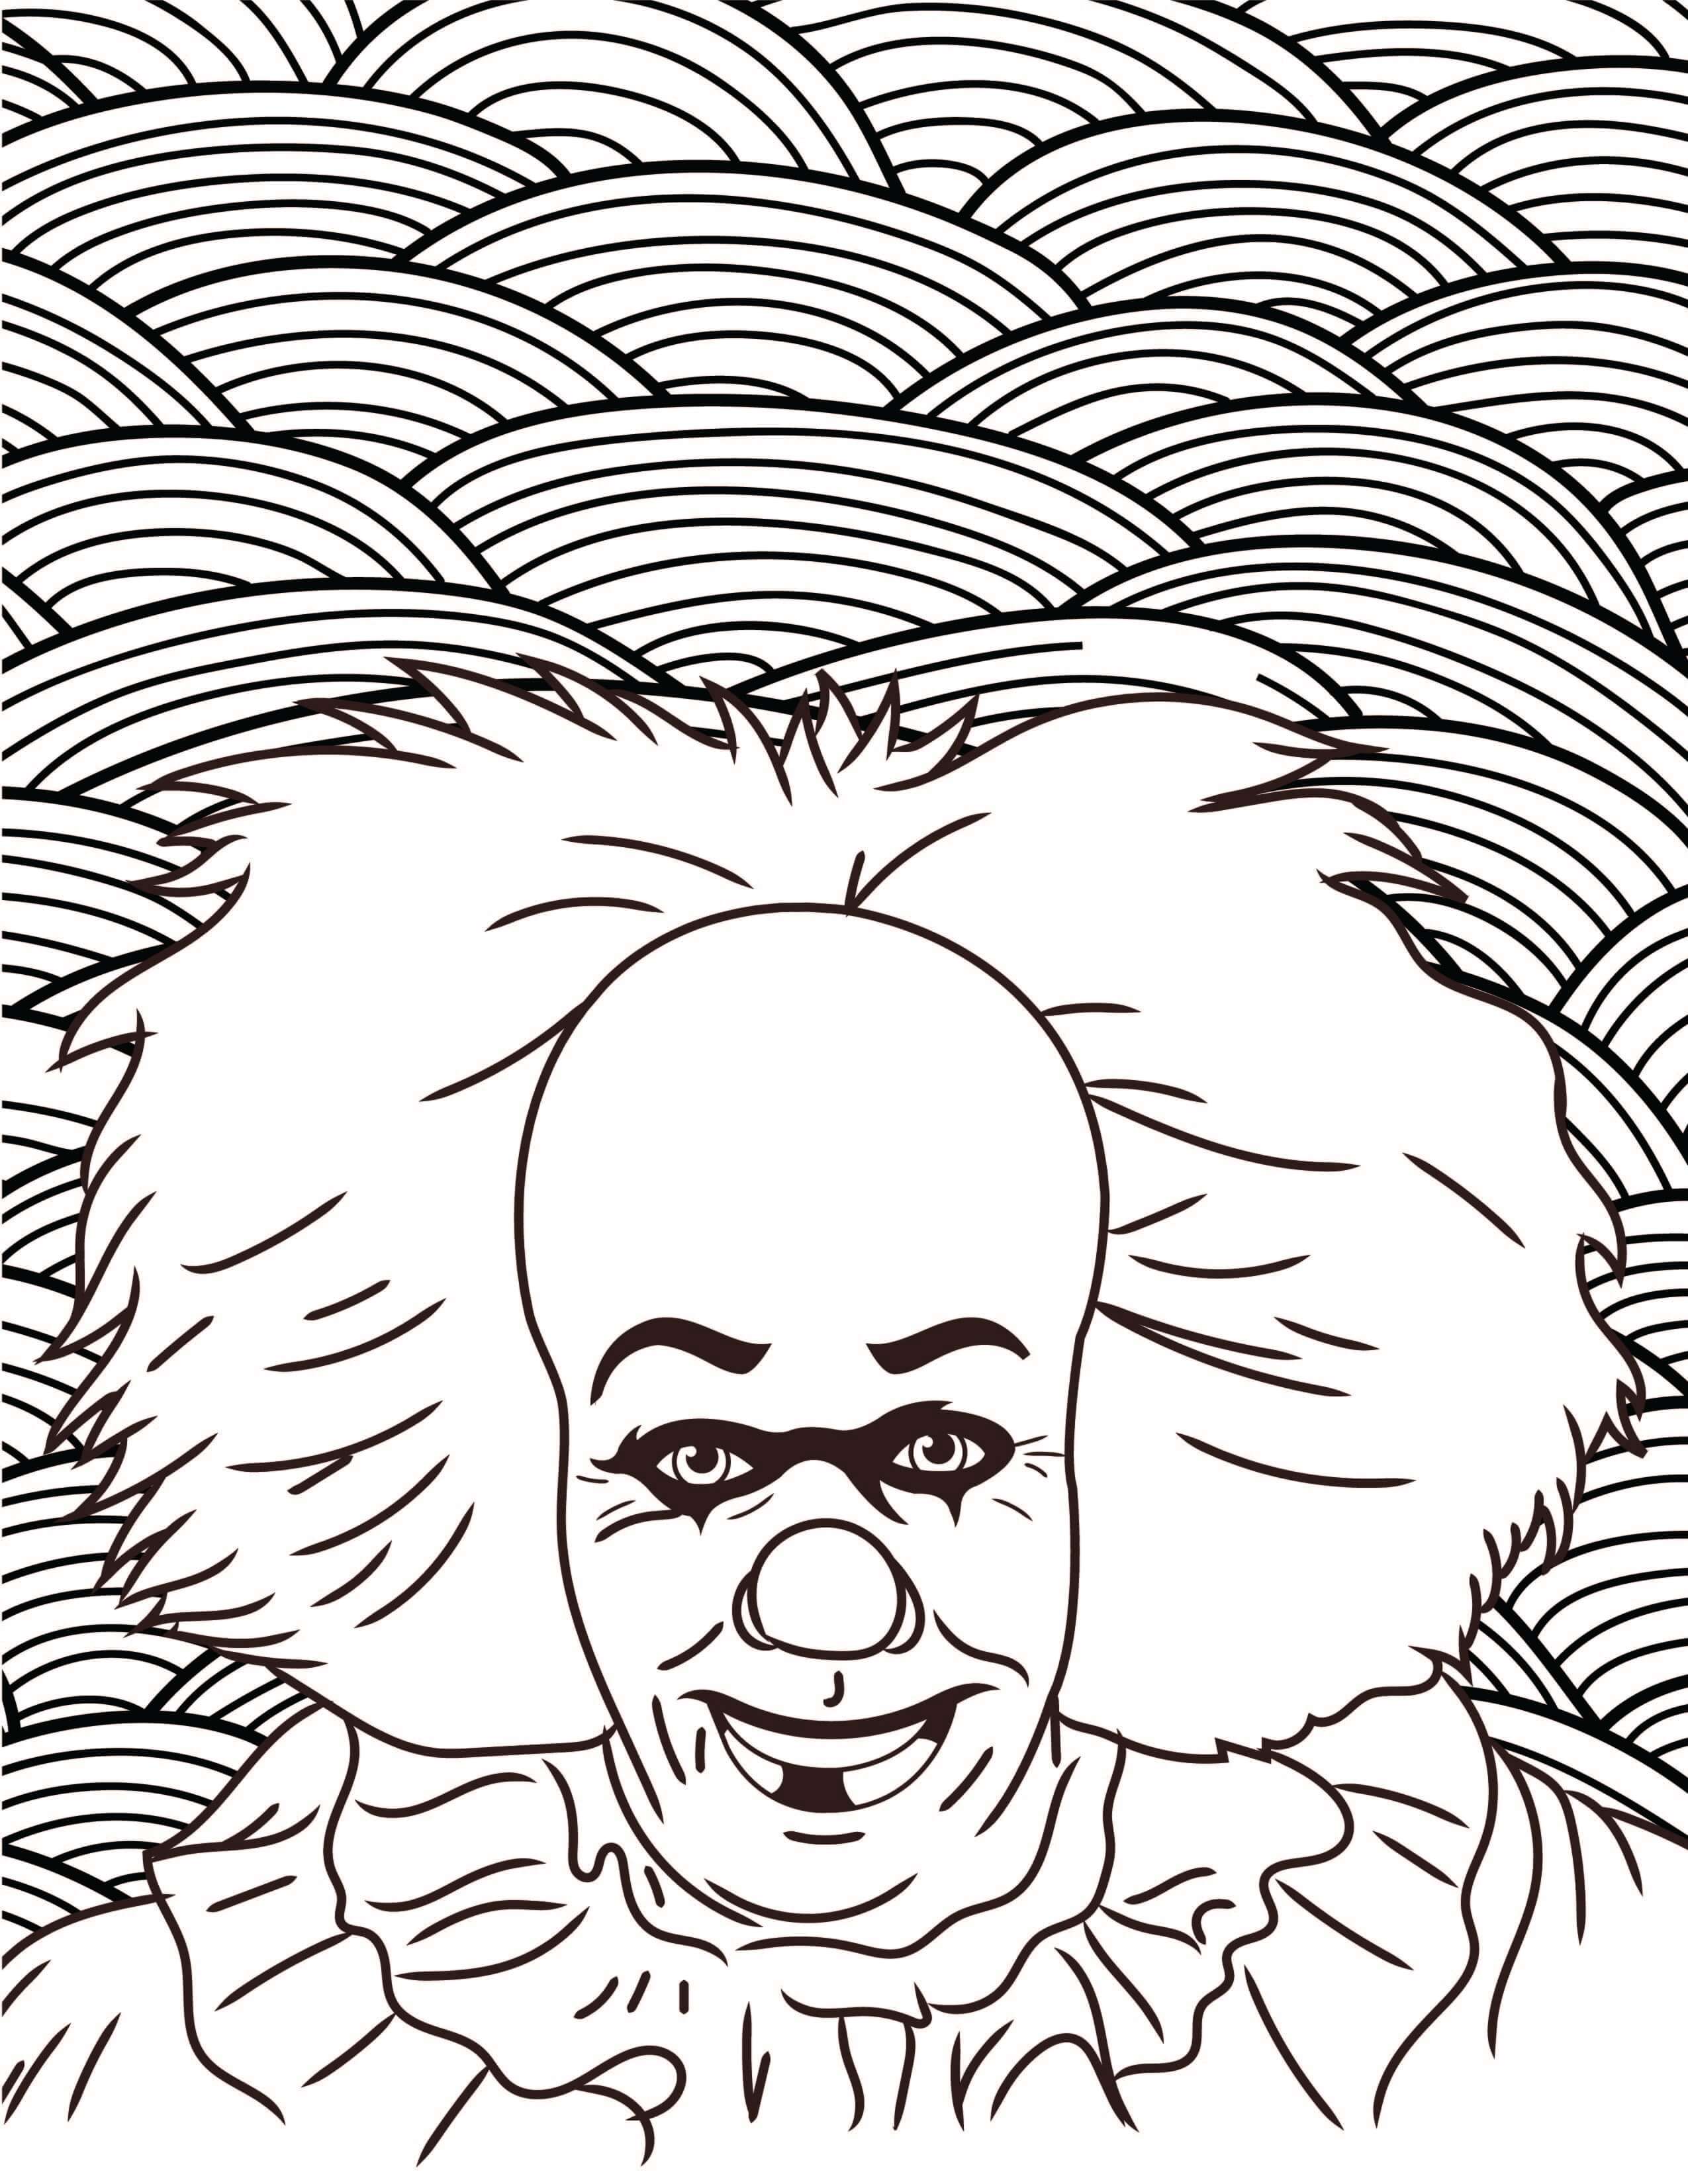 Pennywise Coloring Pages 2017 at GetDrawings | Free download